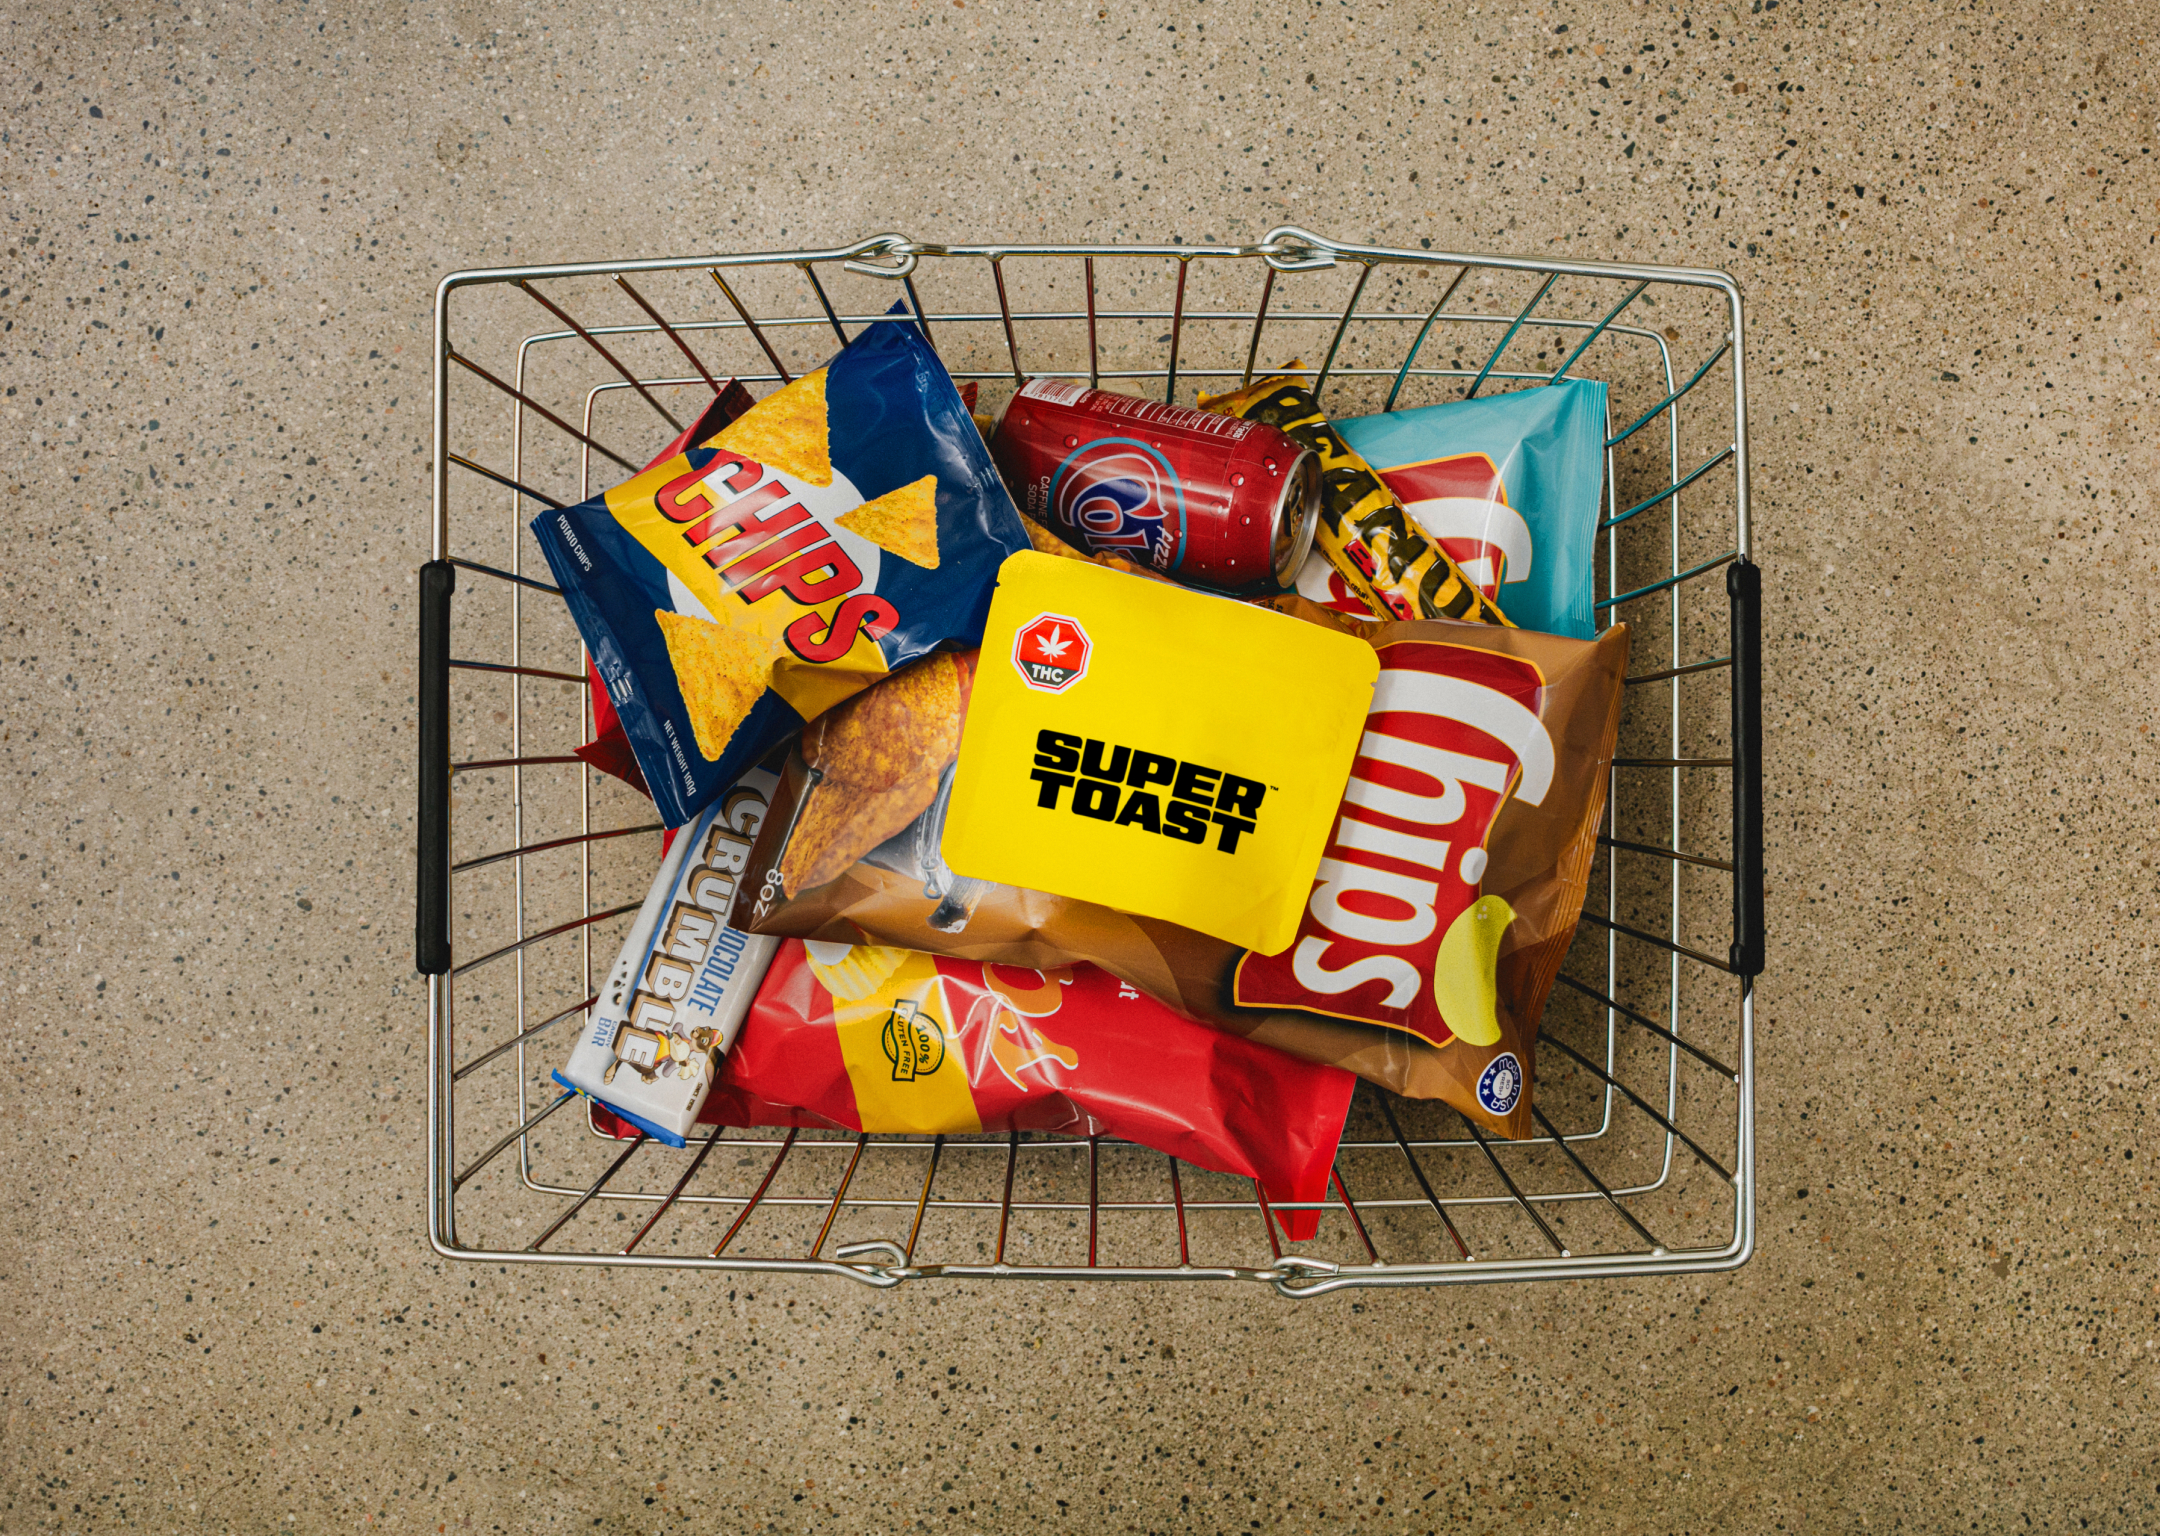 super toast packaging in shopping cart with chip bags